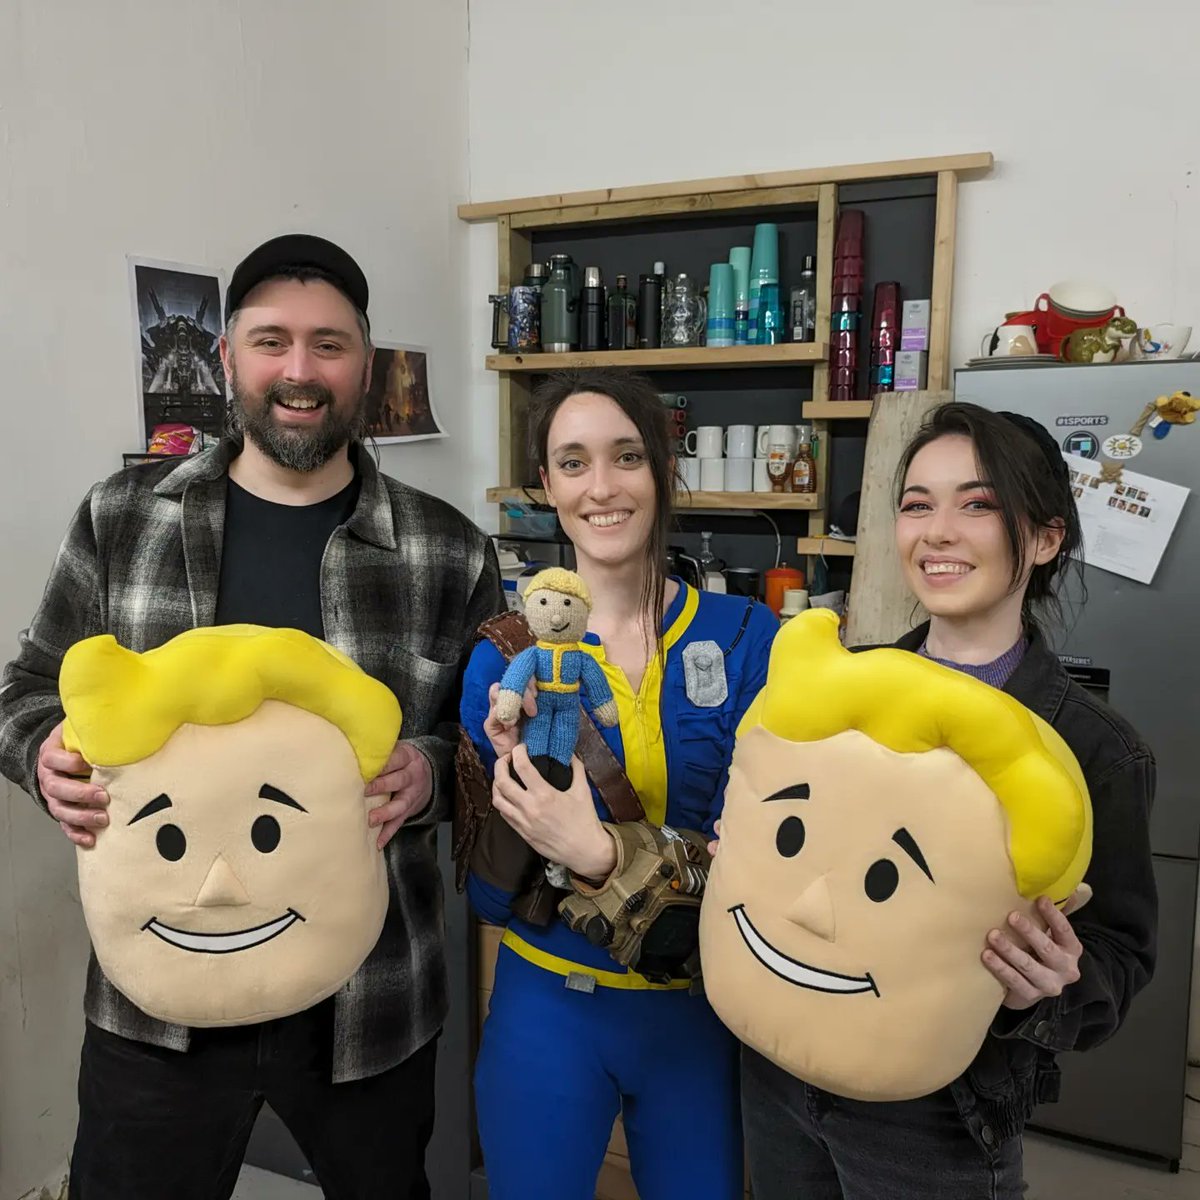 🤩 Such an amazing time at the @Modiphius event at @tSNArena for Fallout Factions: Nuka World! Such in awe I was invited to the launch event, and meeting amazing people, including @HonestWargamer and @Sughammer!

Thoroughly enjoyed playing Fallout Factions!! 🤩
#falloutfactions